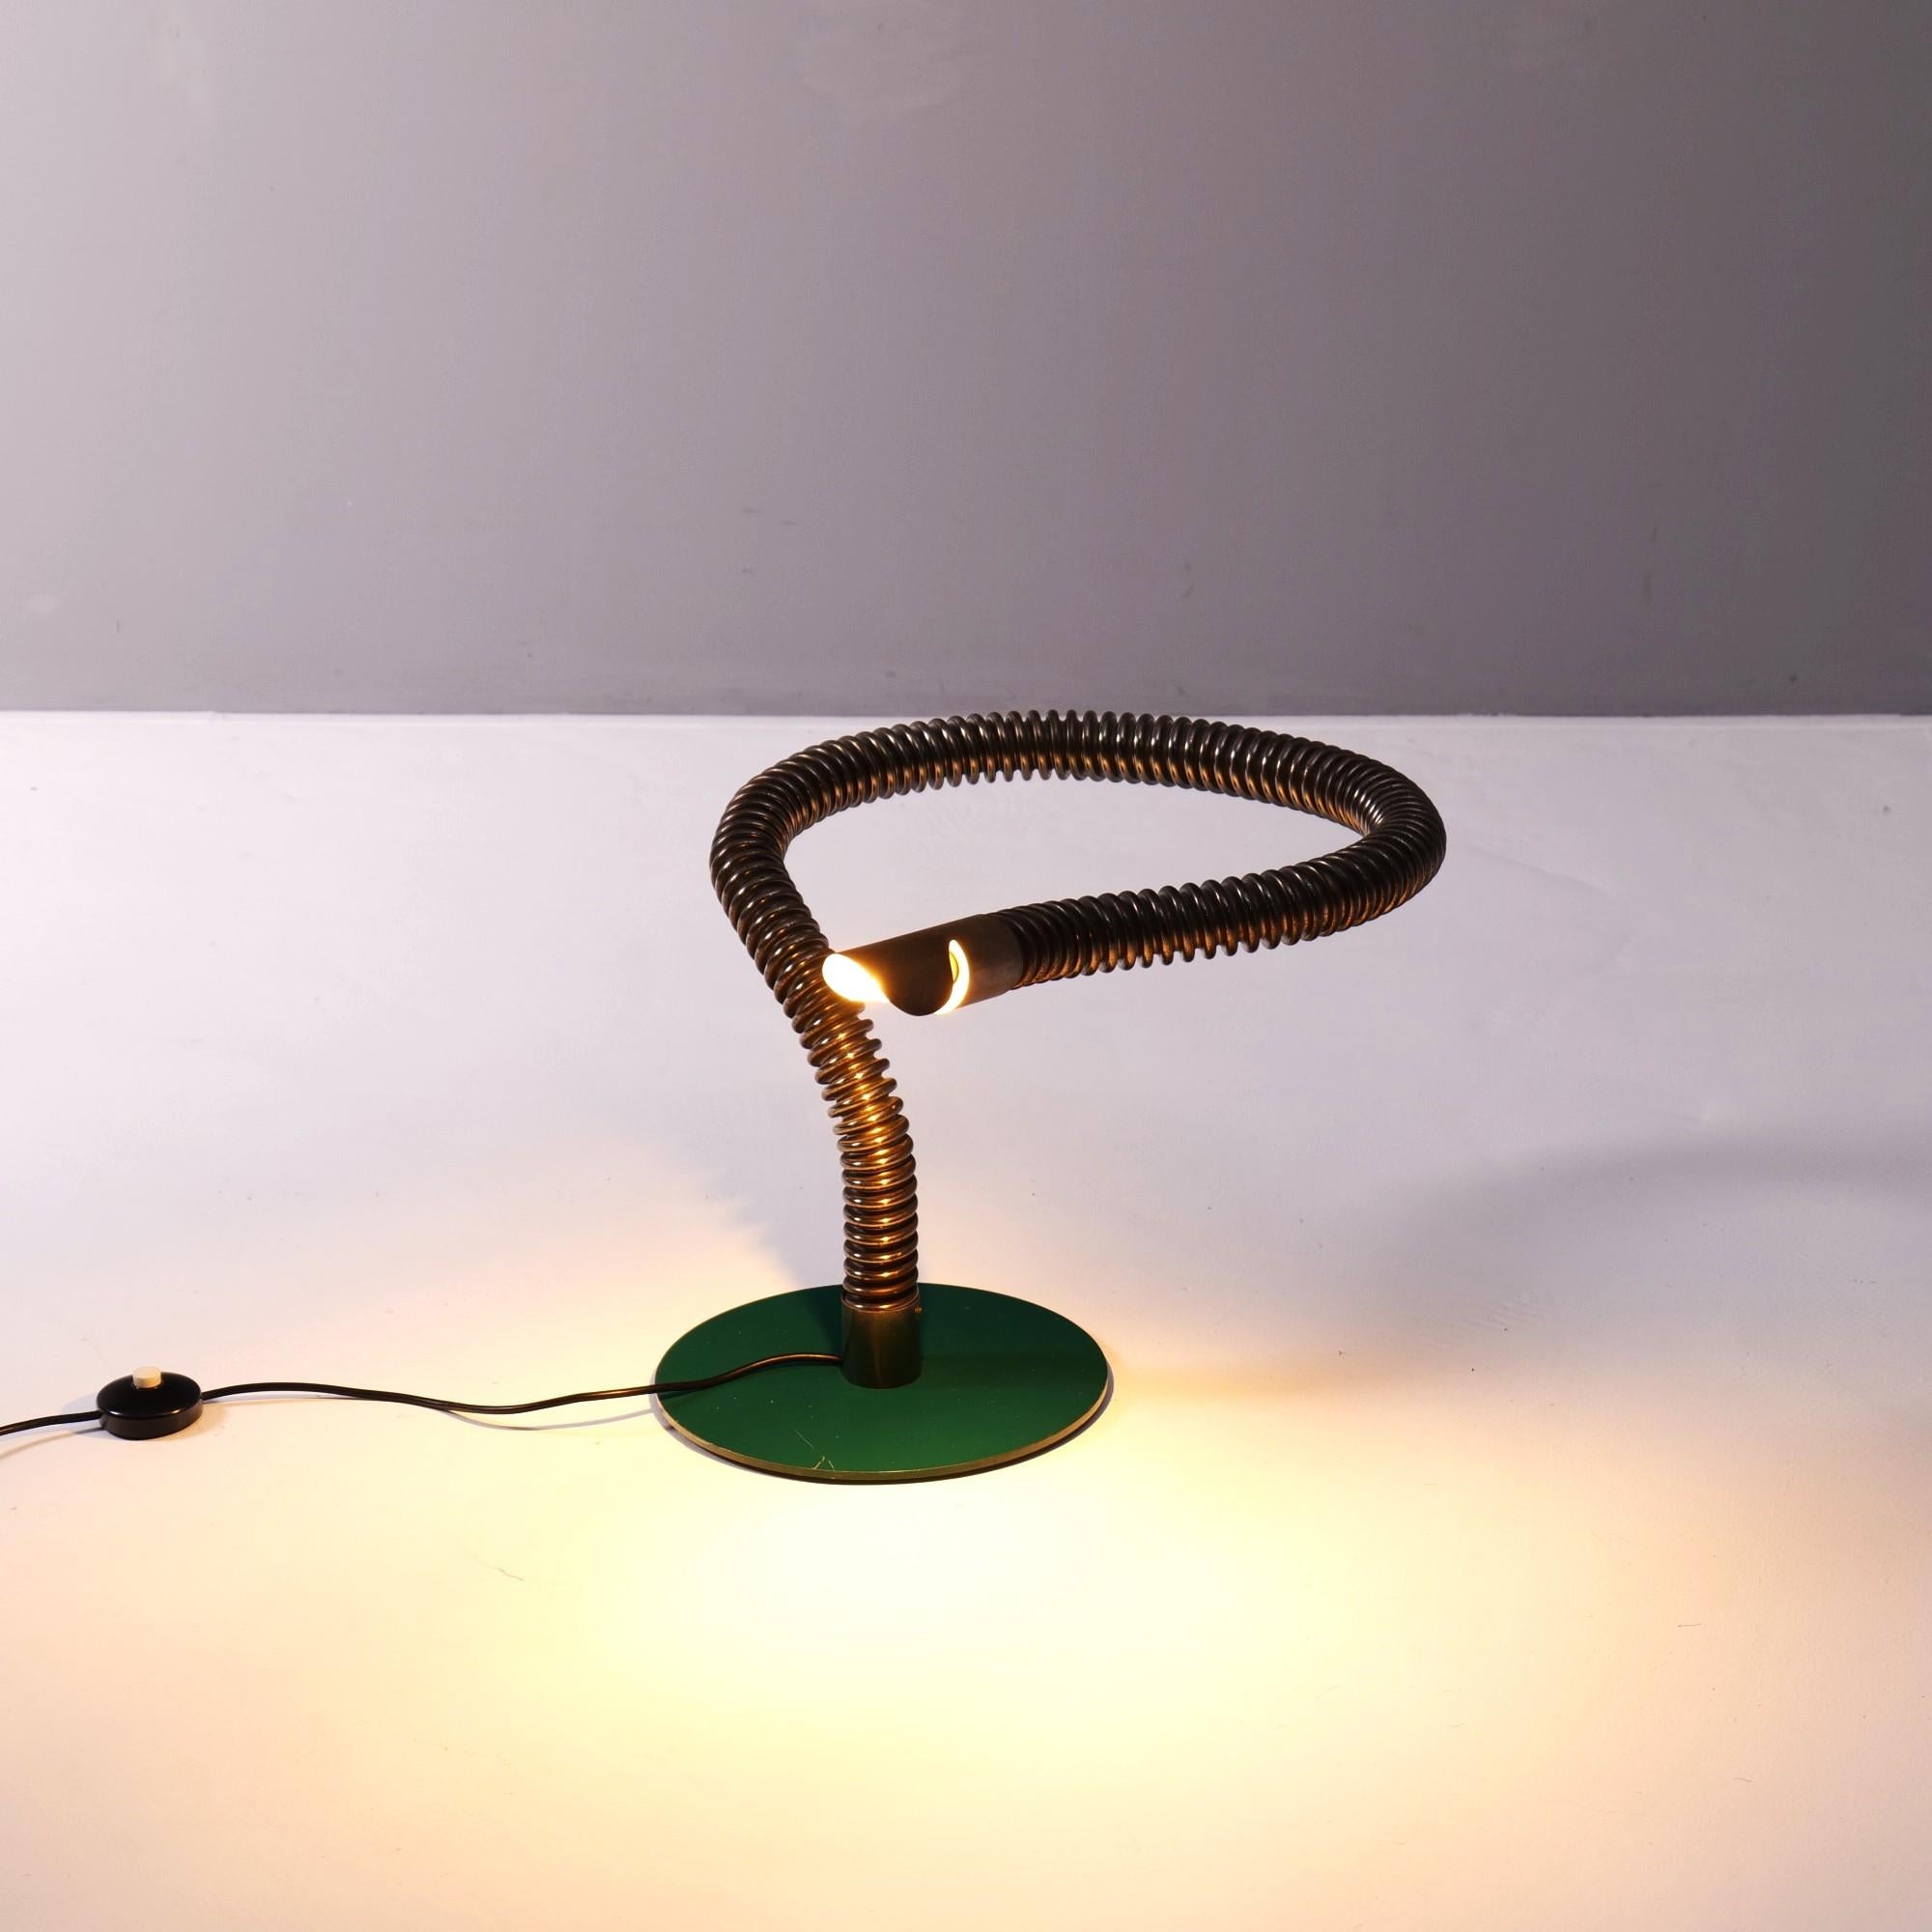 Sculptural, early postmodern table lamp by Angelo Lelii for Arredoluce.
The lamp originally came from an apartment in Paris, furnished by the famous interior designer Alberto Pinto.
Flexible tube made of steel, but firmly attached in this form to a